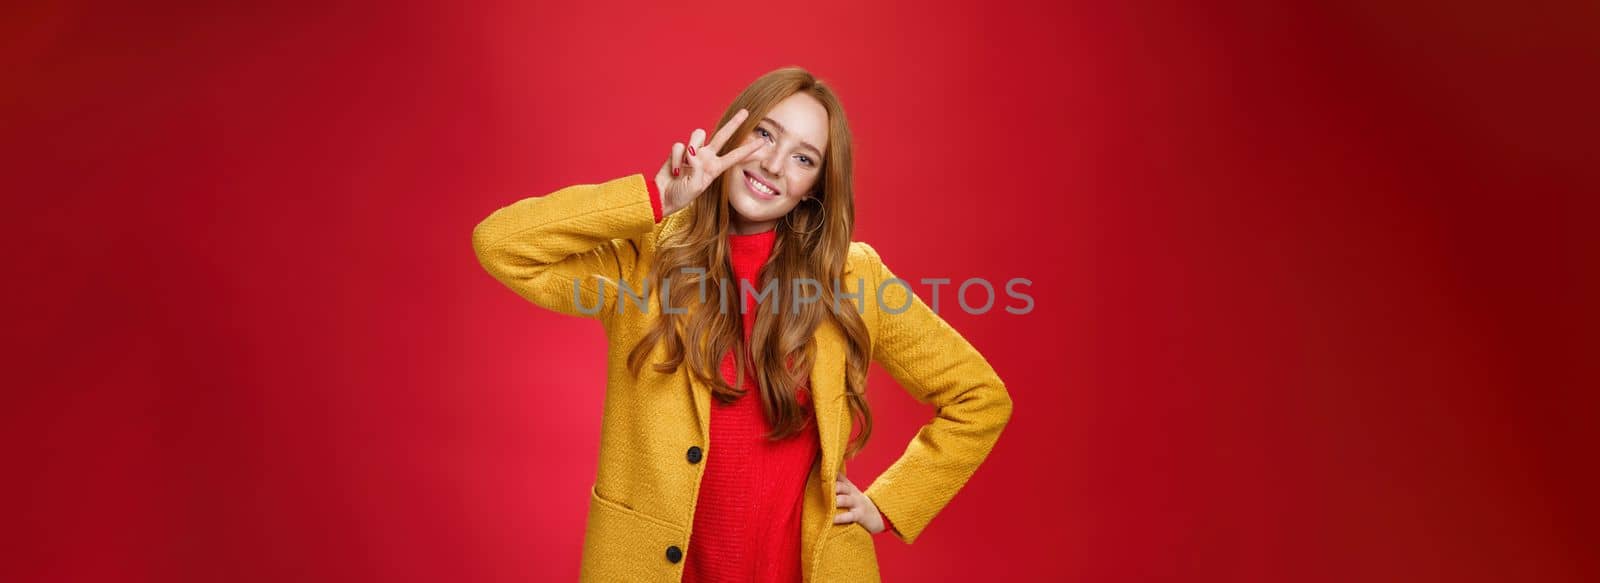 Friendly girl smiling happily, tilting head and showing peace or victory gesture near face, holding hand on hip as posing in stylish elegant yellow coat and sweater against red background by Benzoix